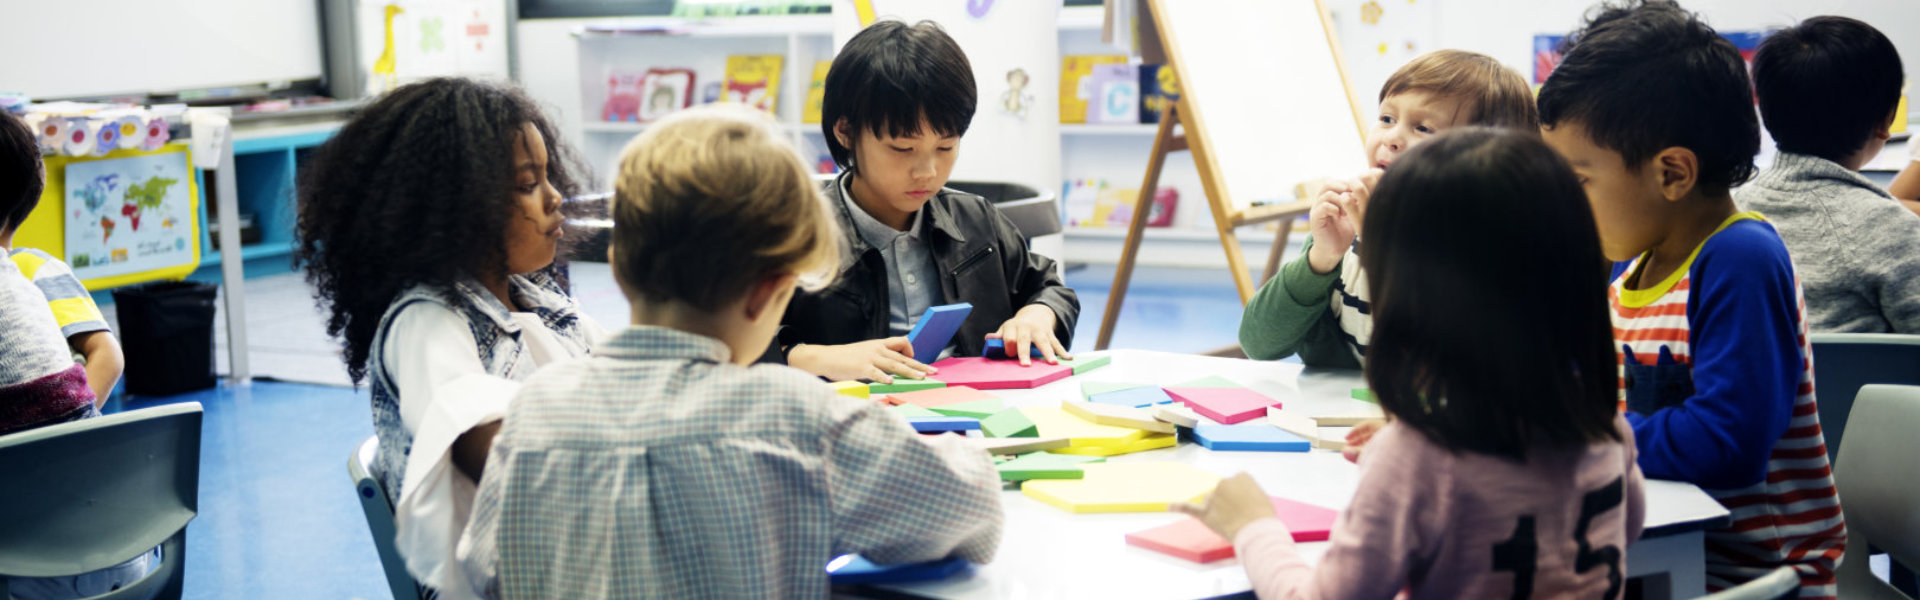 Group of diverse students at daycare sitting drawing